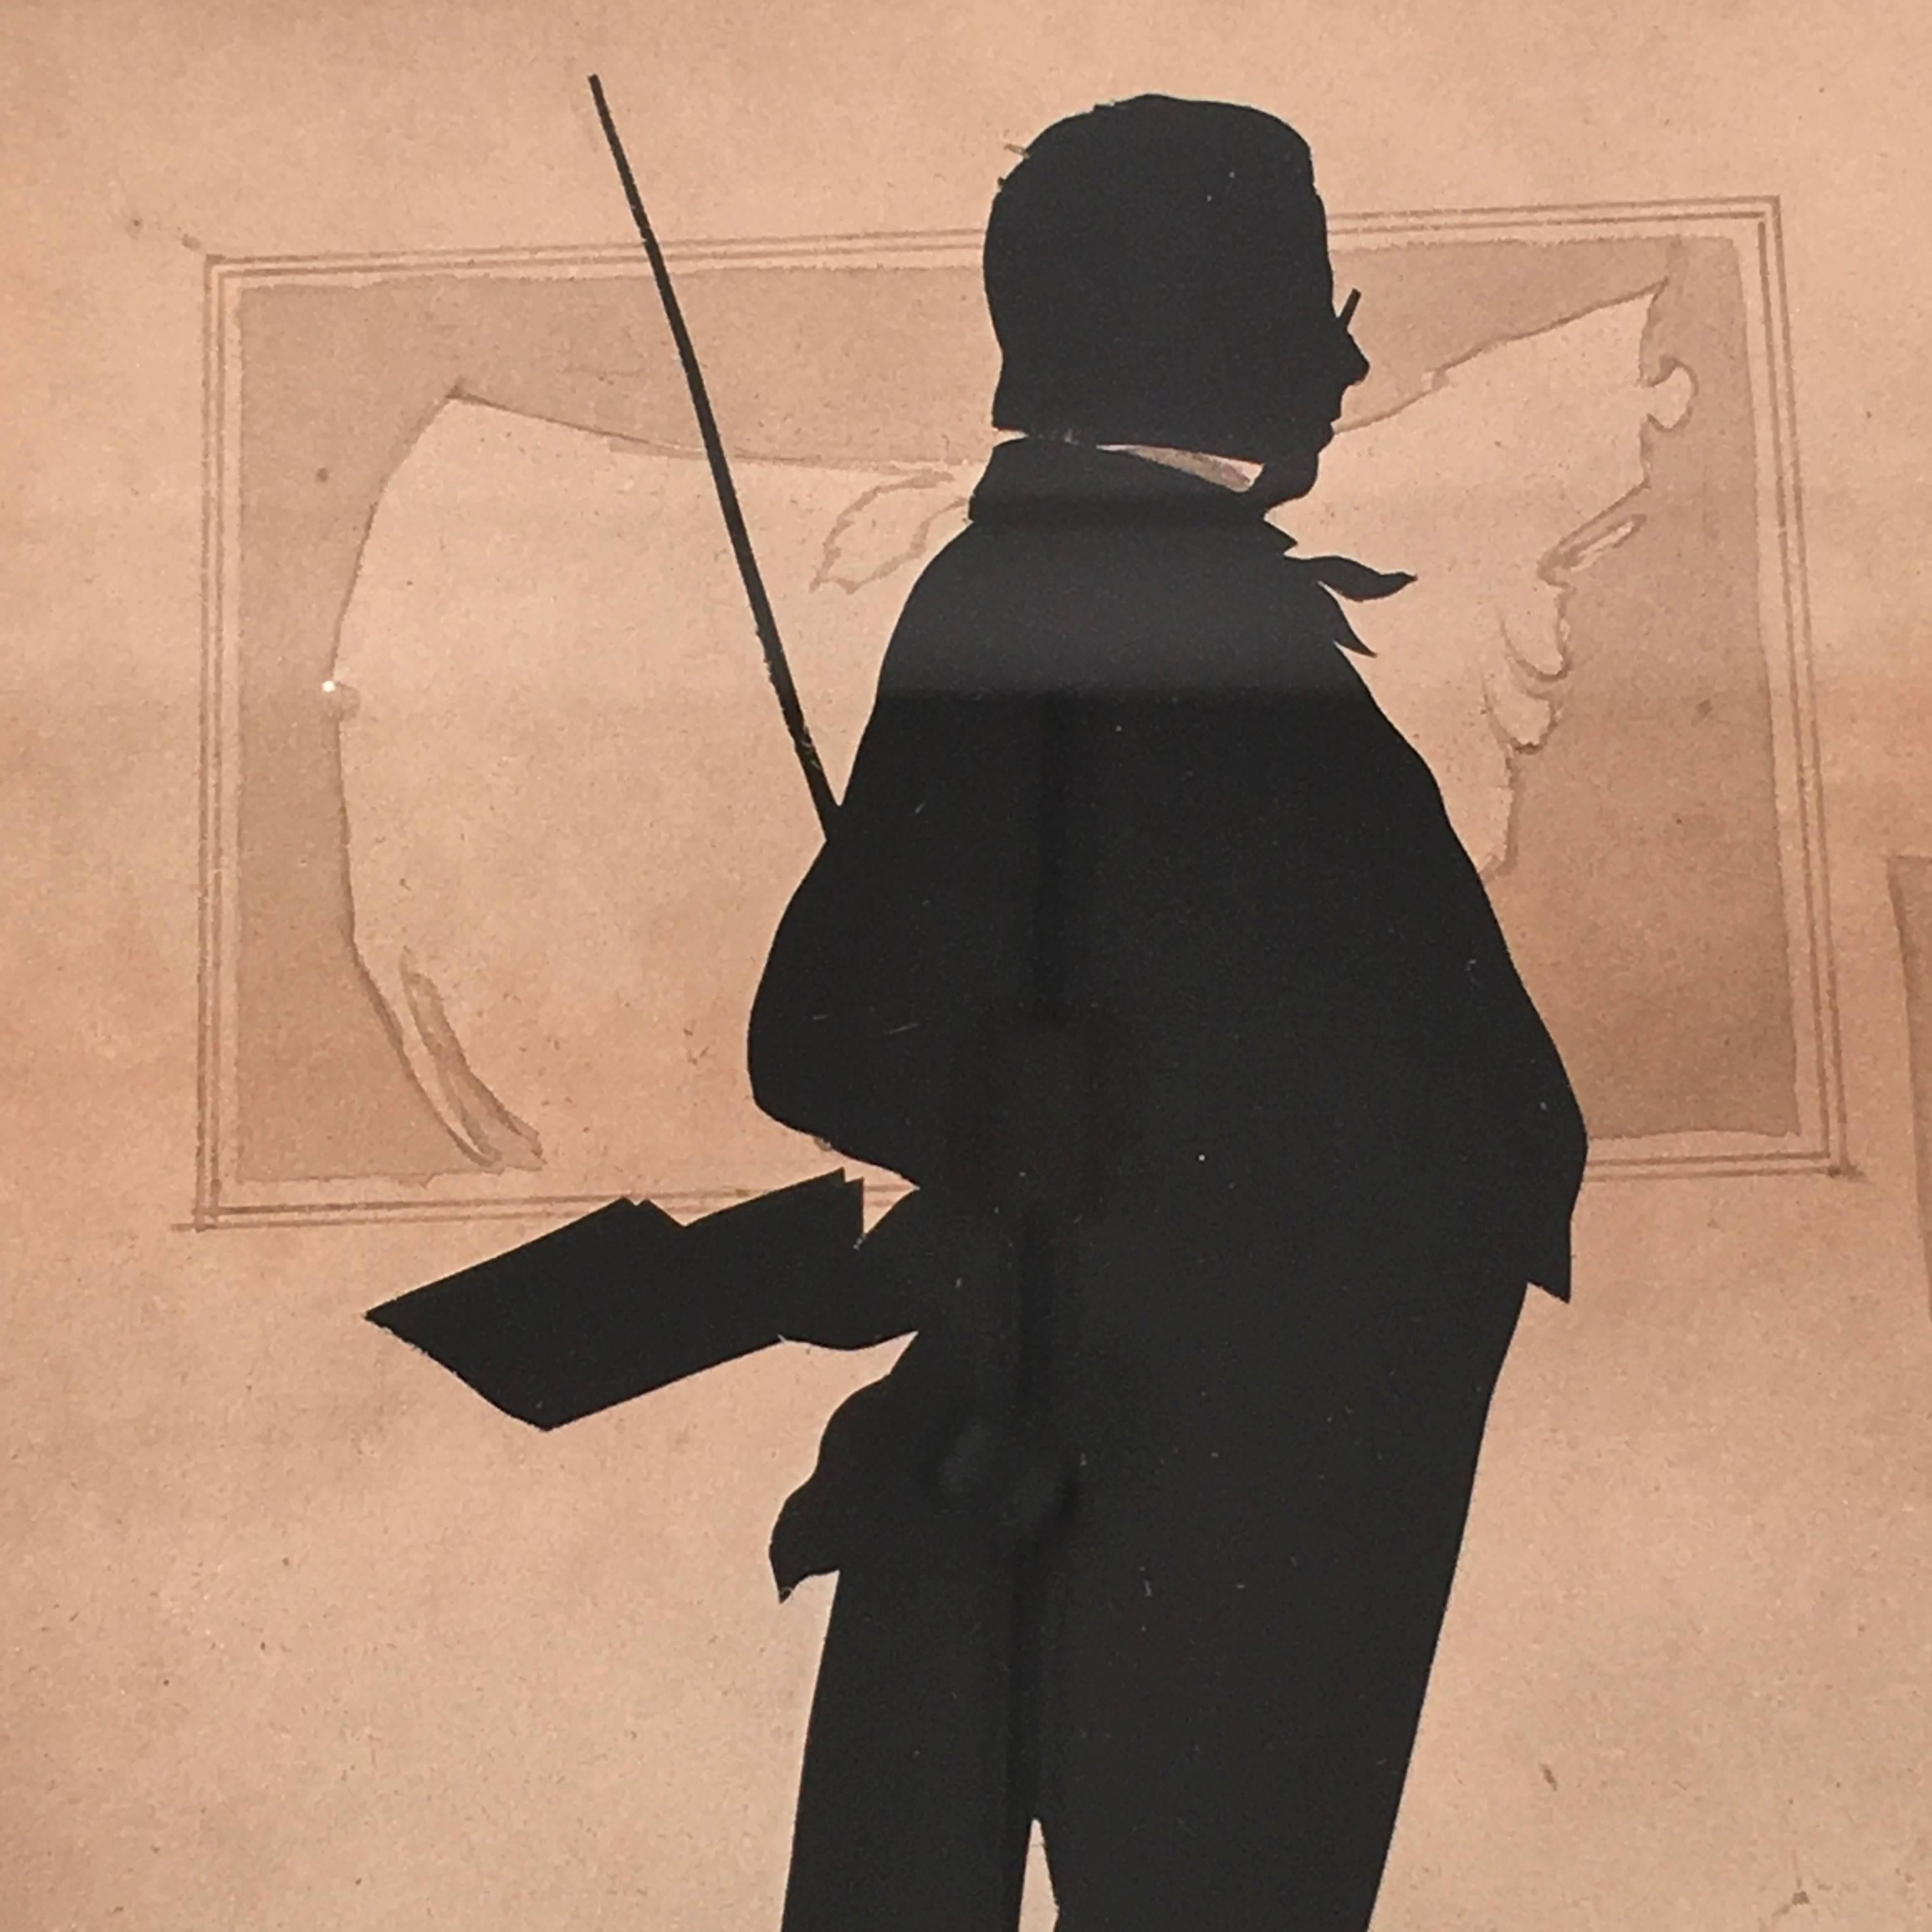 American Unusual 19th Century Silhouette of an Ominous School Master or Teacher